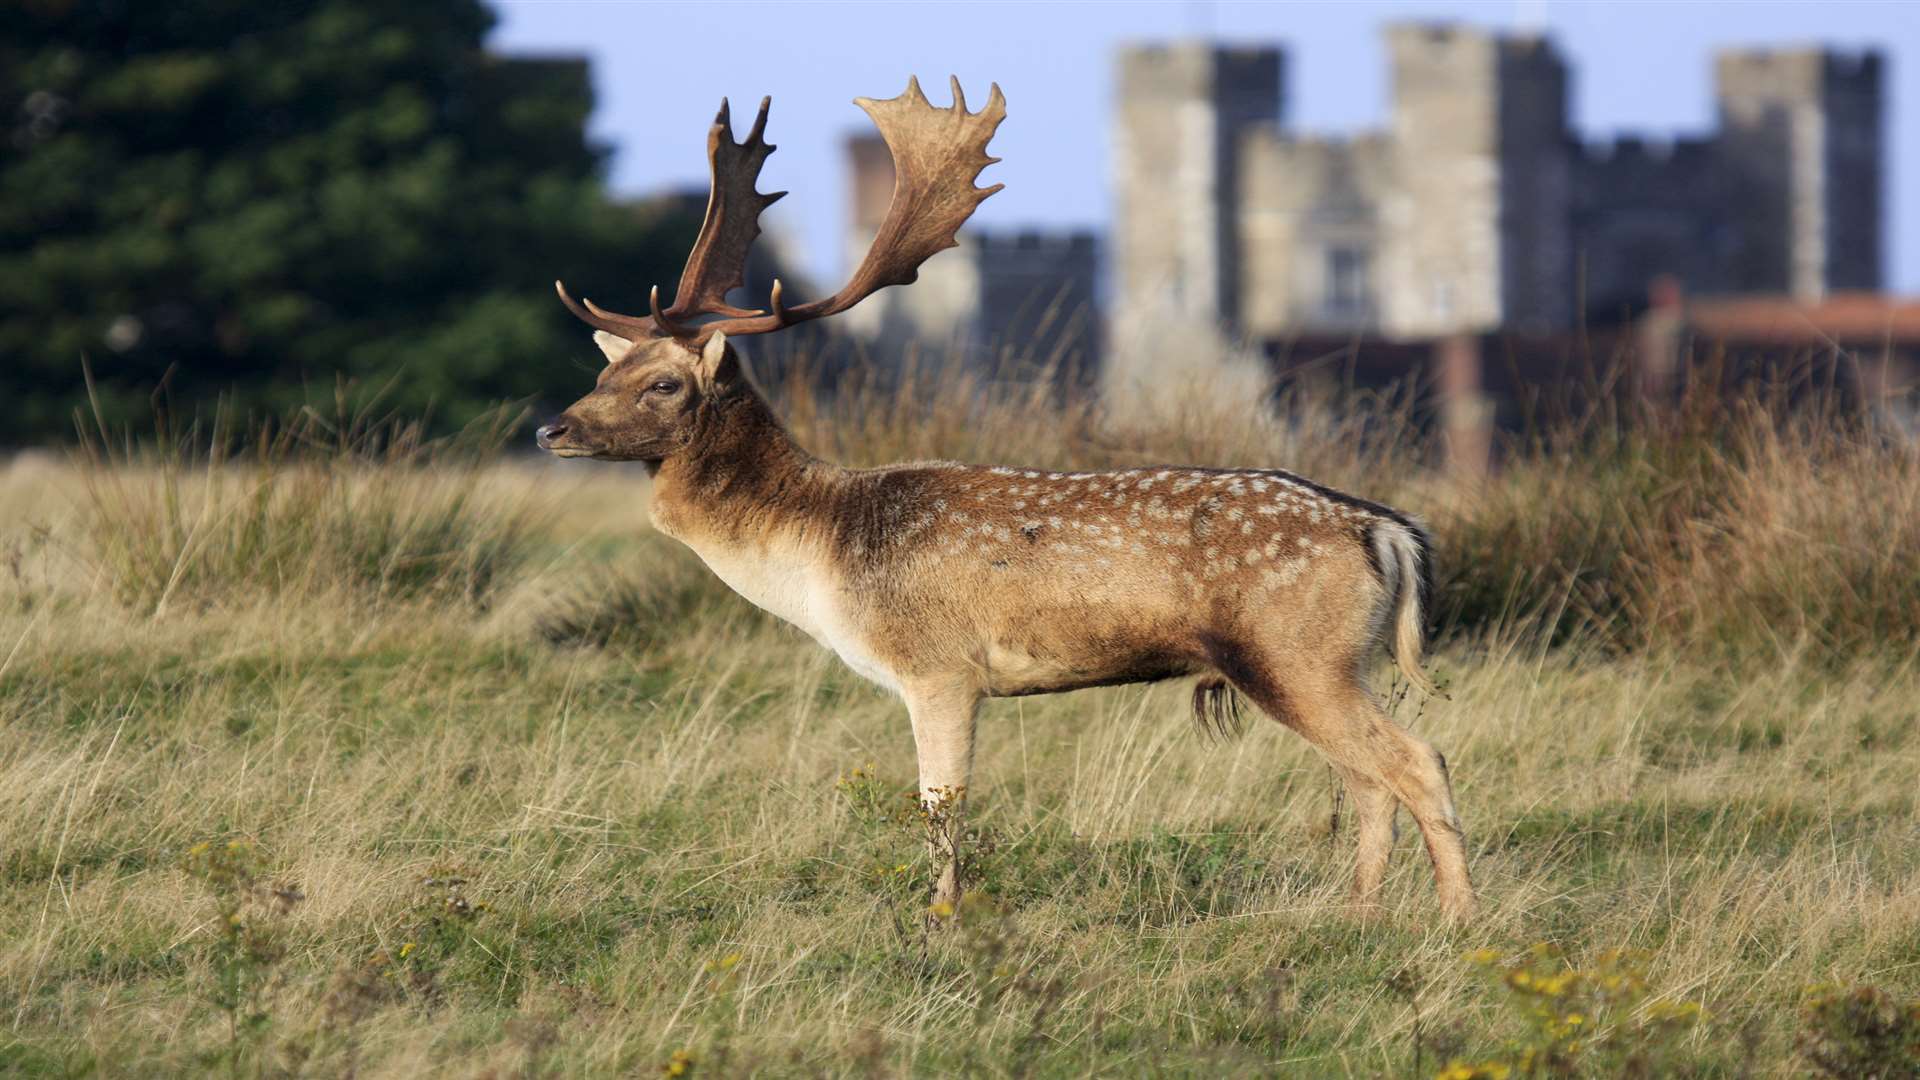 Get to know the locals at Knole Park